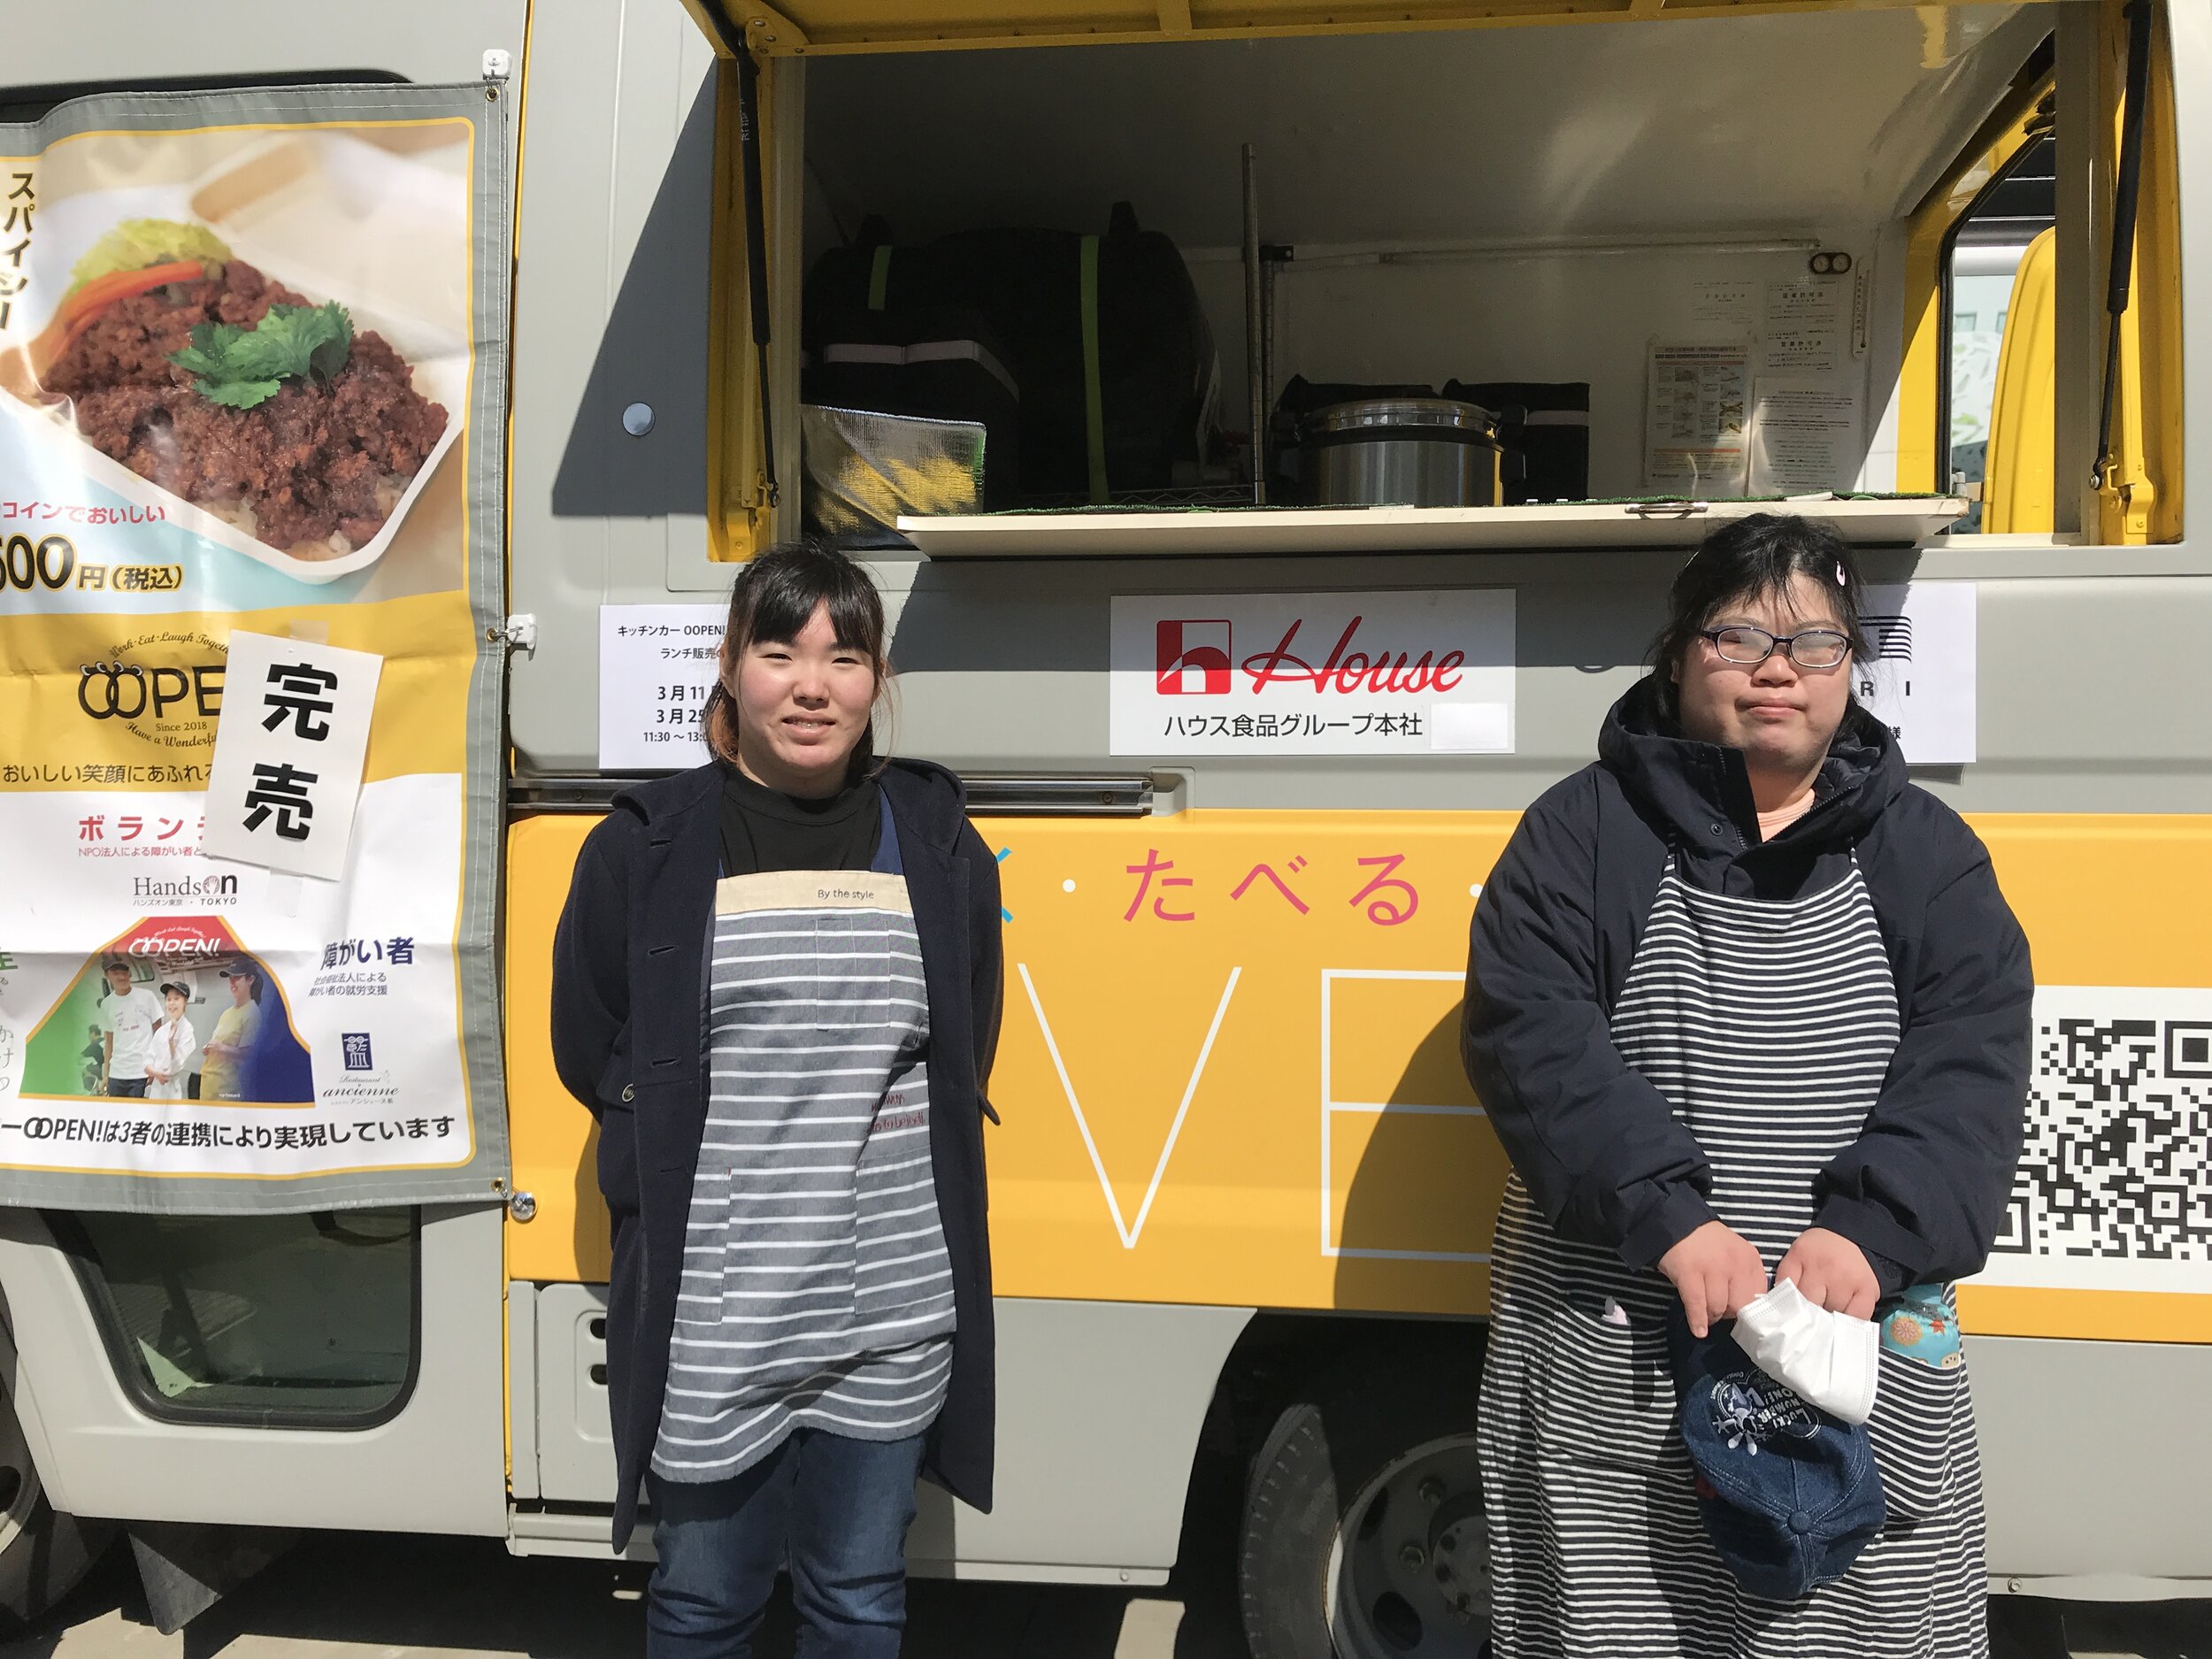 Riho and Haruka Matsui (working partner) in front of LIVES Food Truck